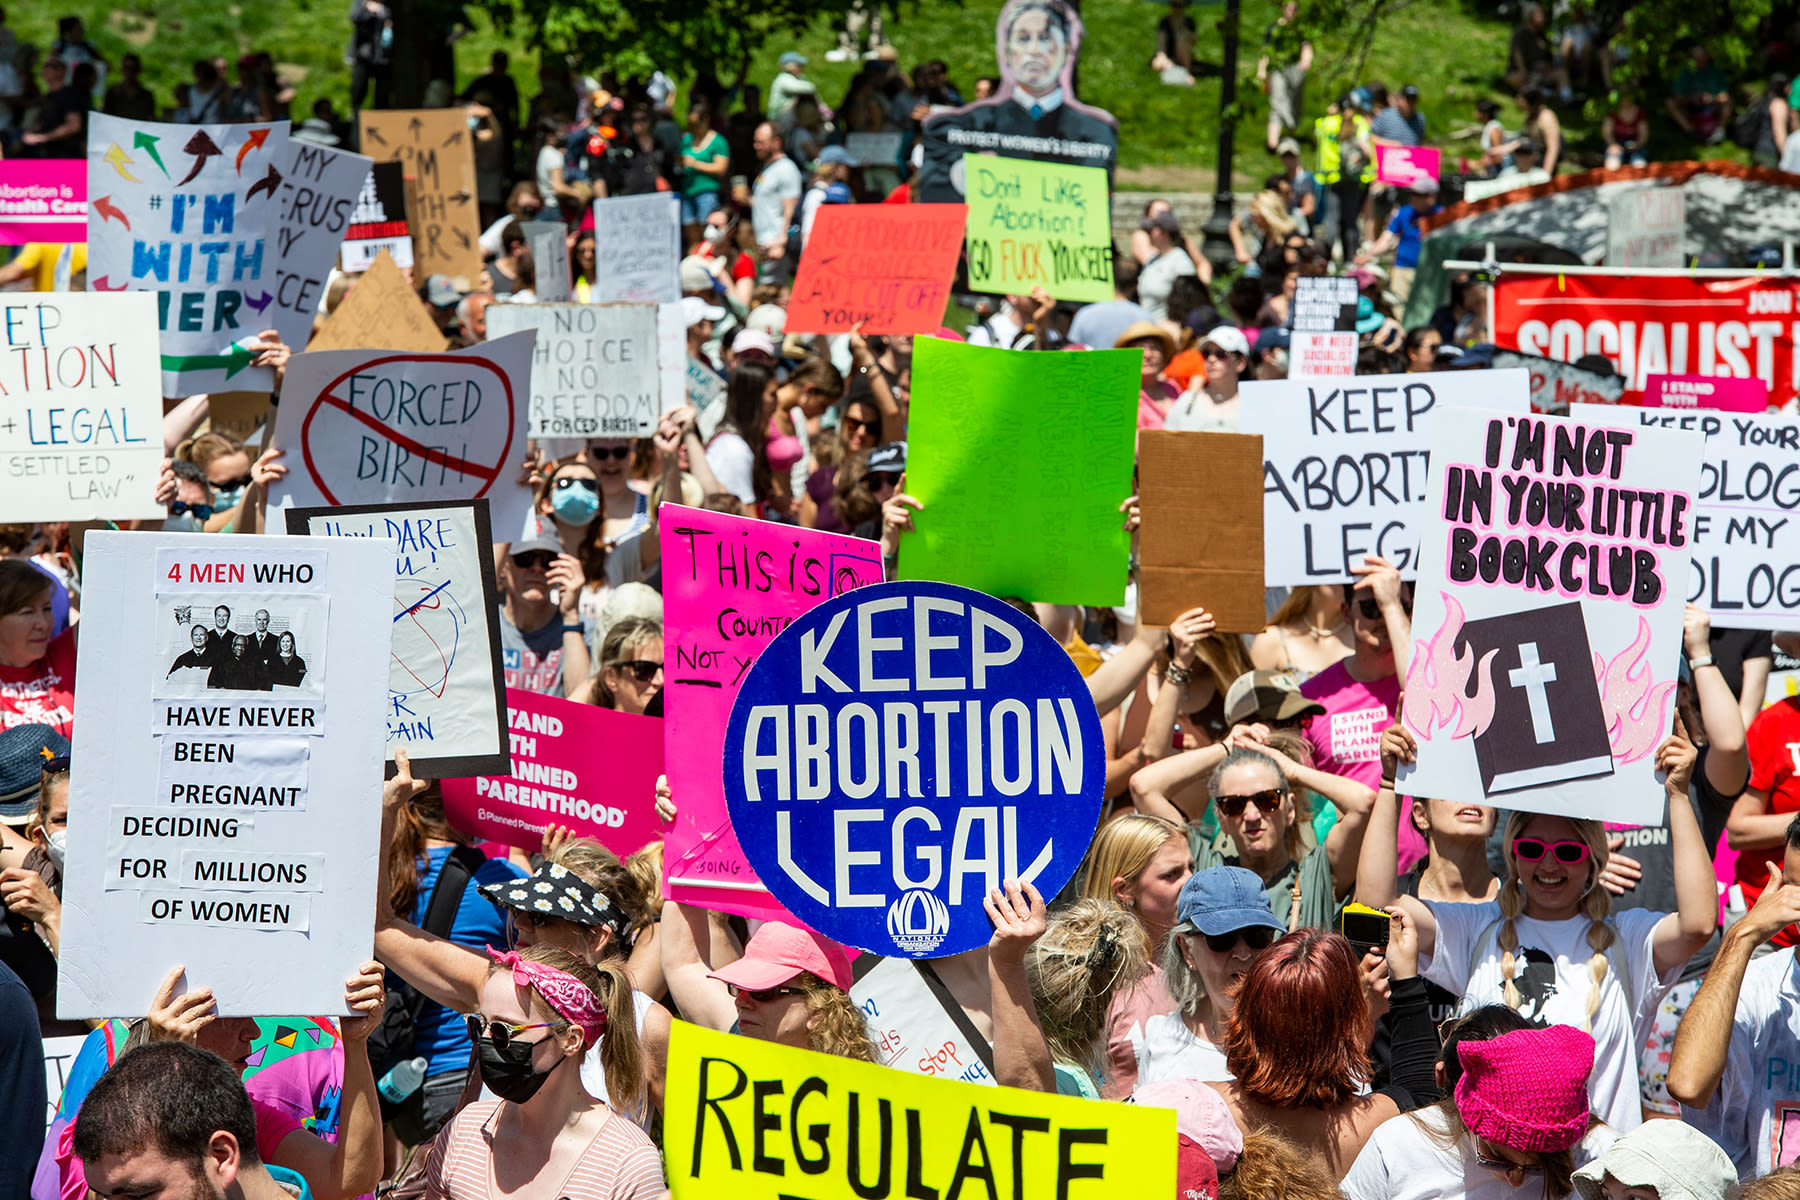 How Conservatives Are Rebranding Pro-Life